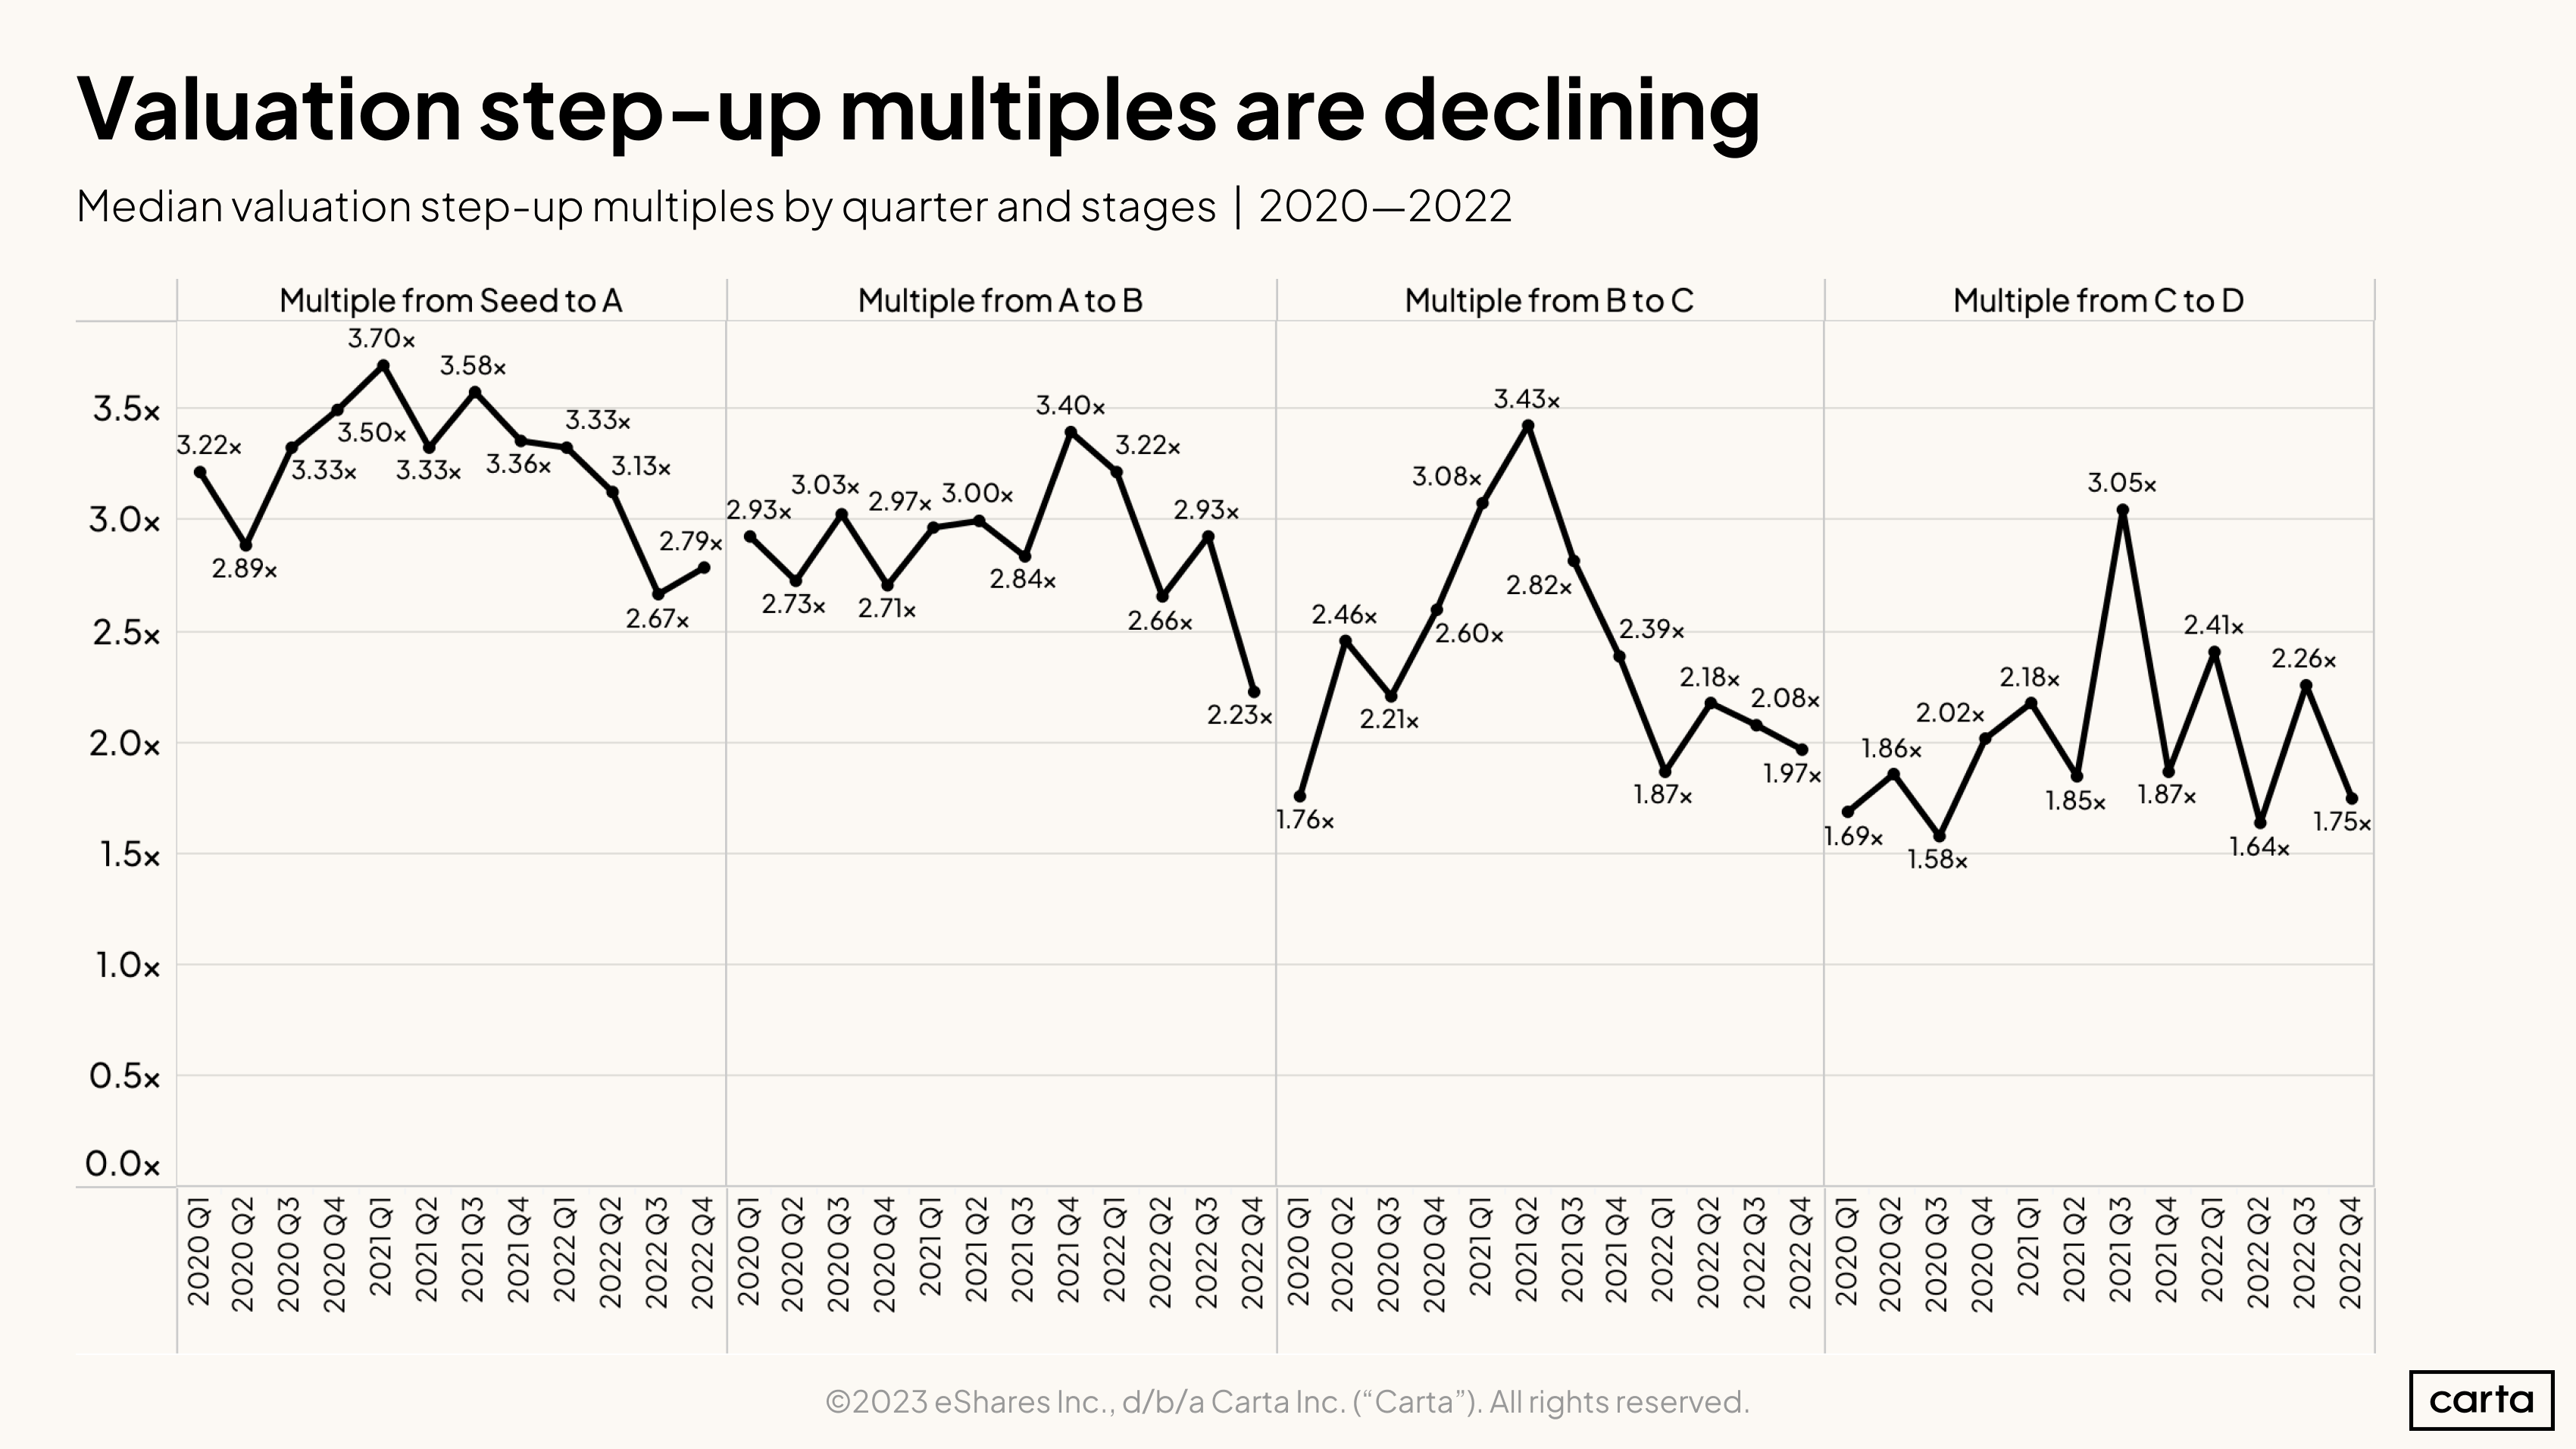 Median valuation step-up multiples by quarter and stages, 2020- -2022